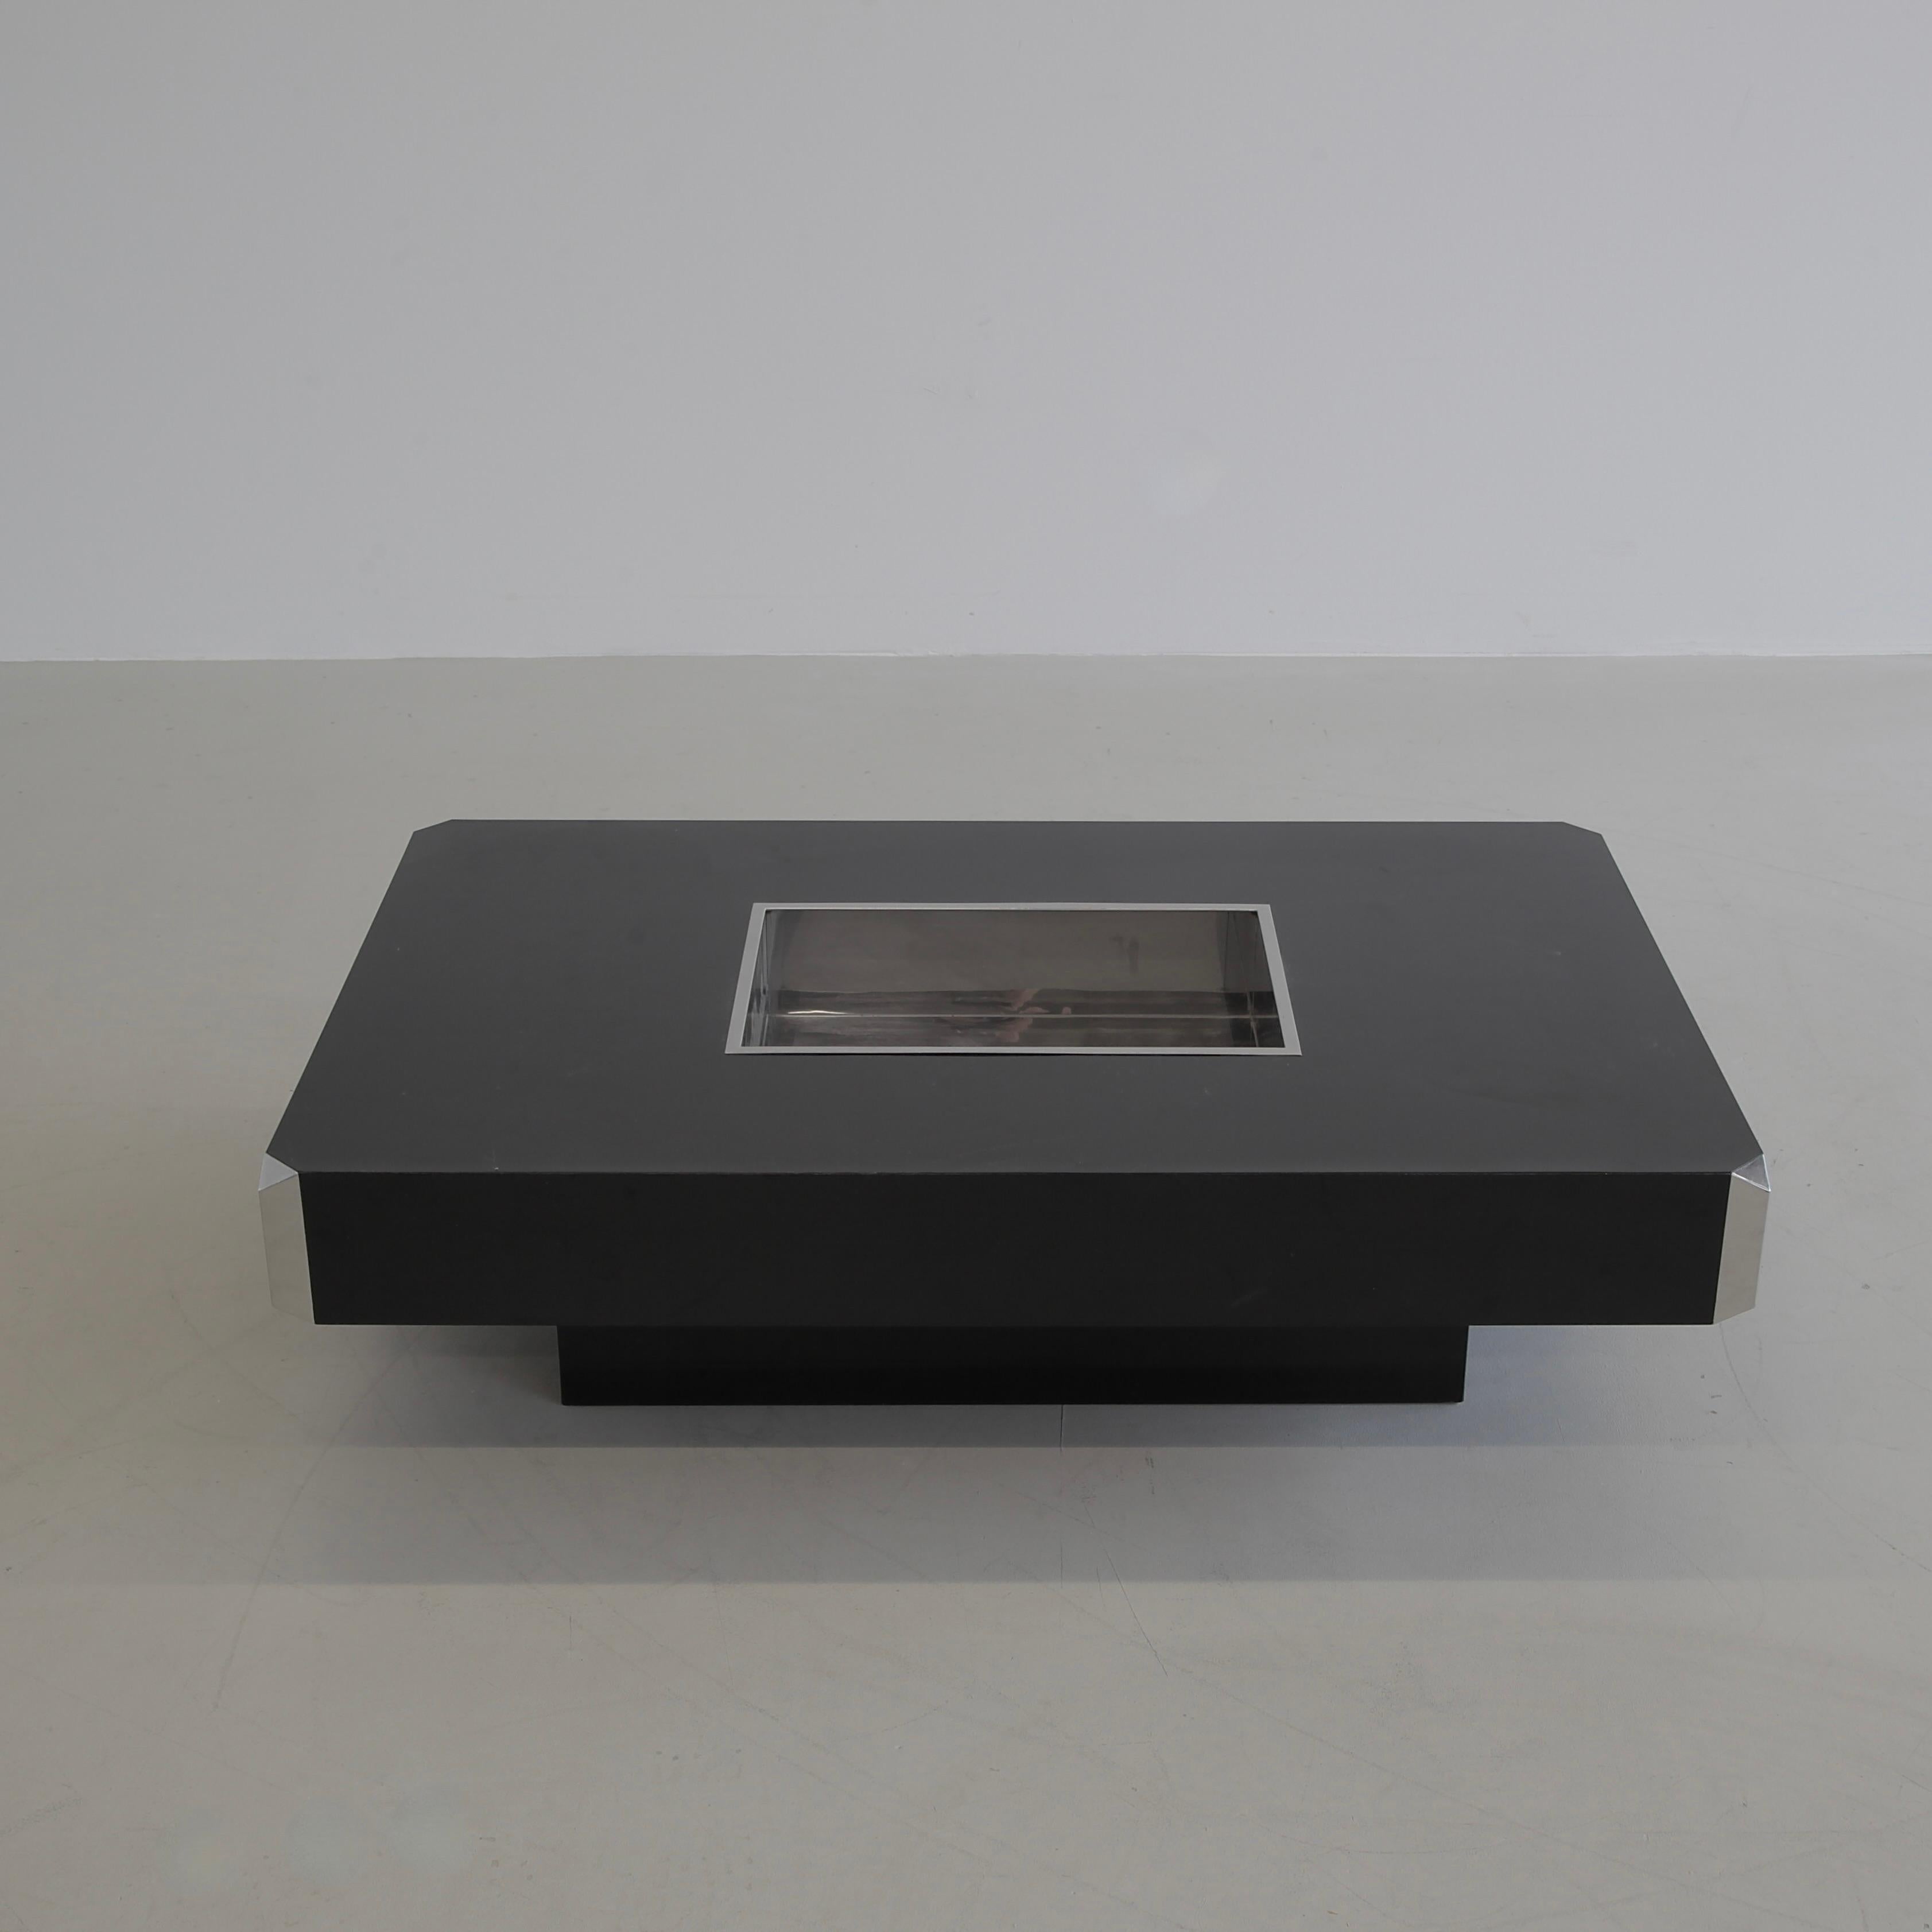 Coffee table, designed by Willy Rizzo. Italy, Mario Sabot, Manzano (Udine) 1974.

Model: Alveo, black Formica covered wooden table construction with inserted stainless steel tray/ bucket and chromed corner pieces. This is the classic Willy Rizzo